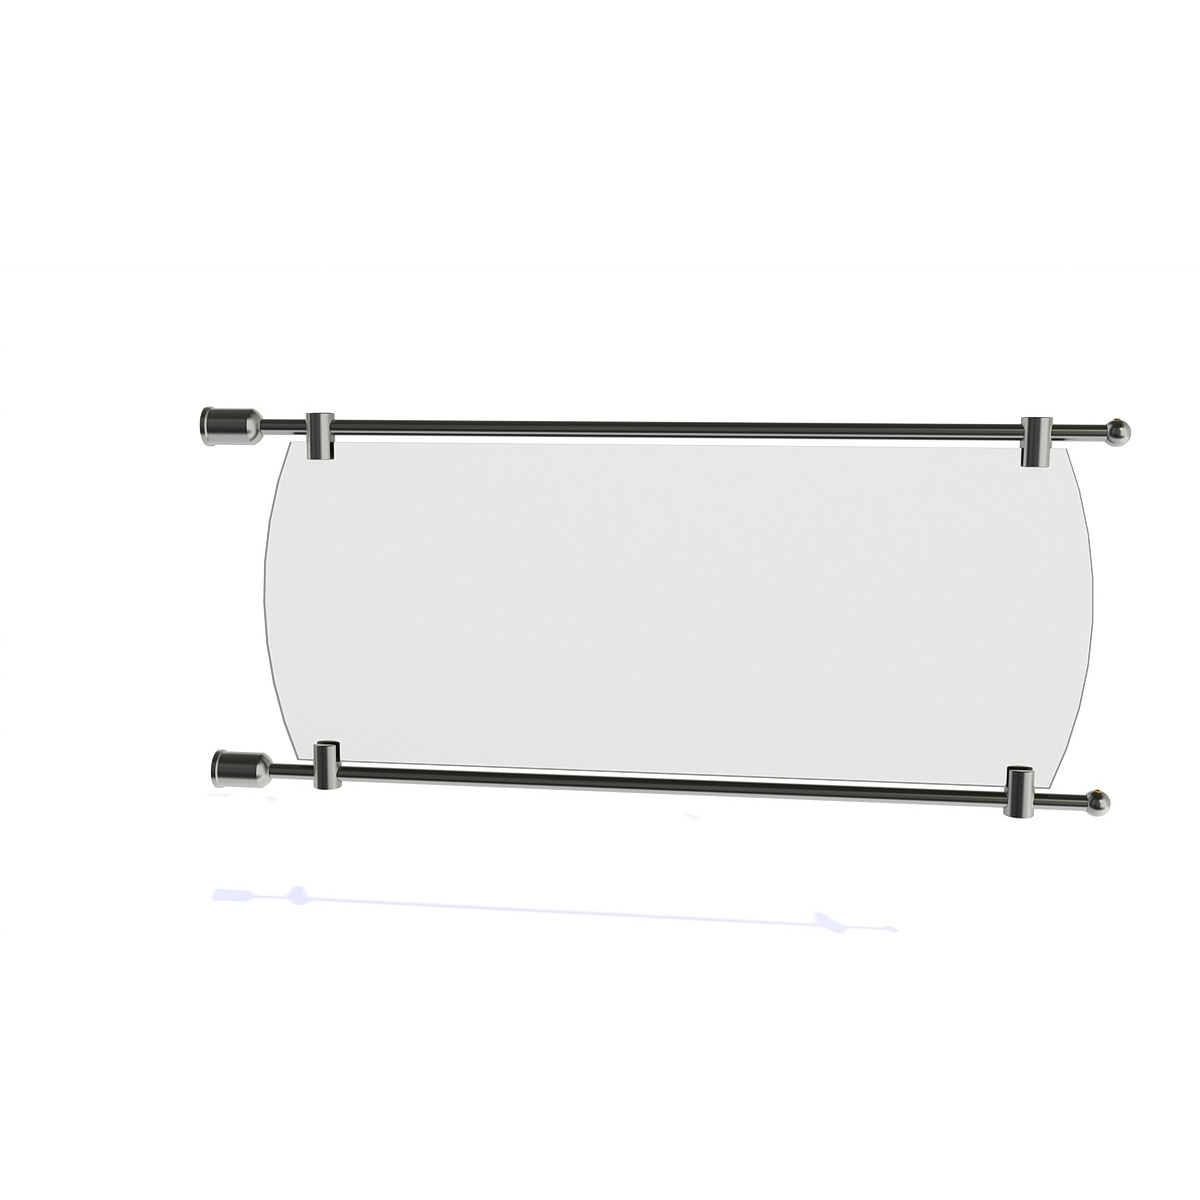 Set of 2, 3/8'' Diameter Rod Projecting Sign, Aluminum Clear Anodized, 25 13/16''. Material thickness up to 5/16''